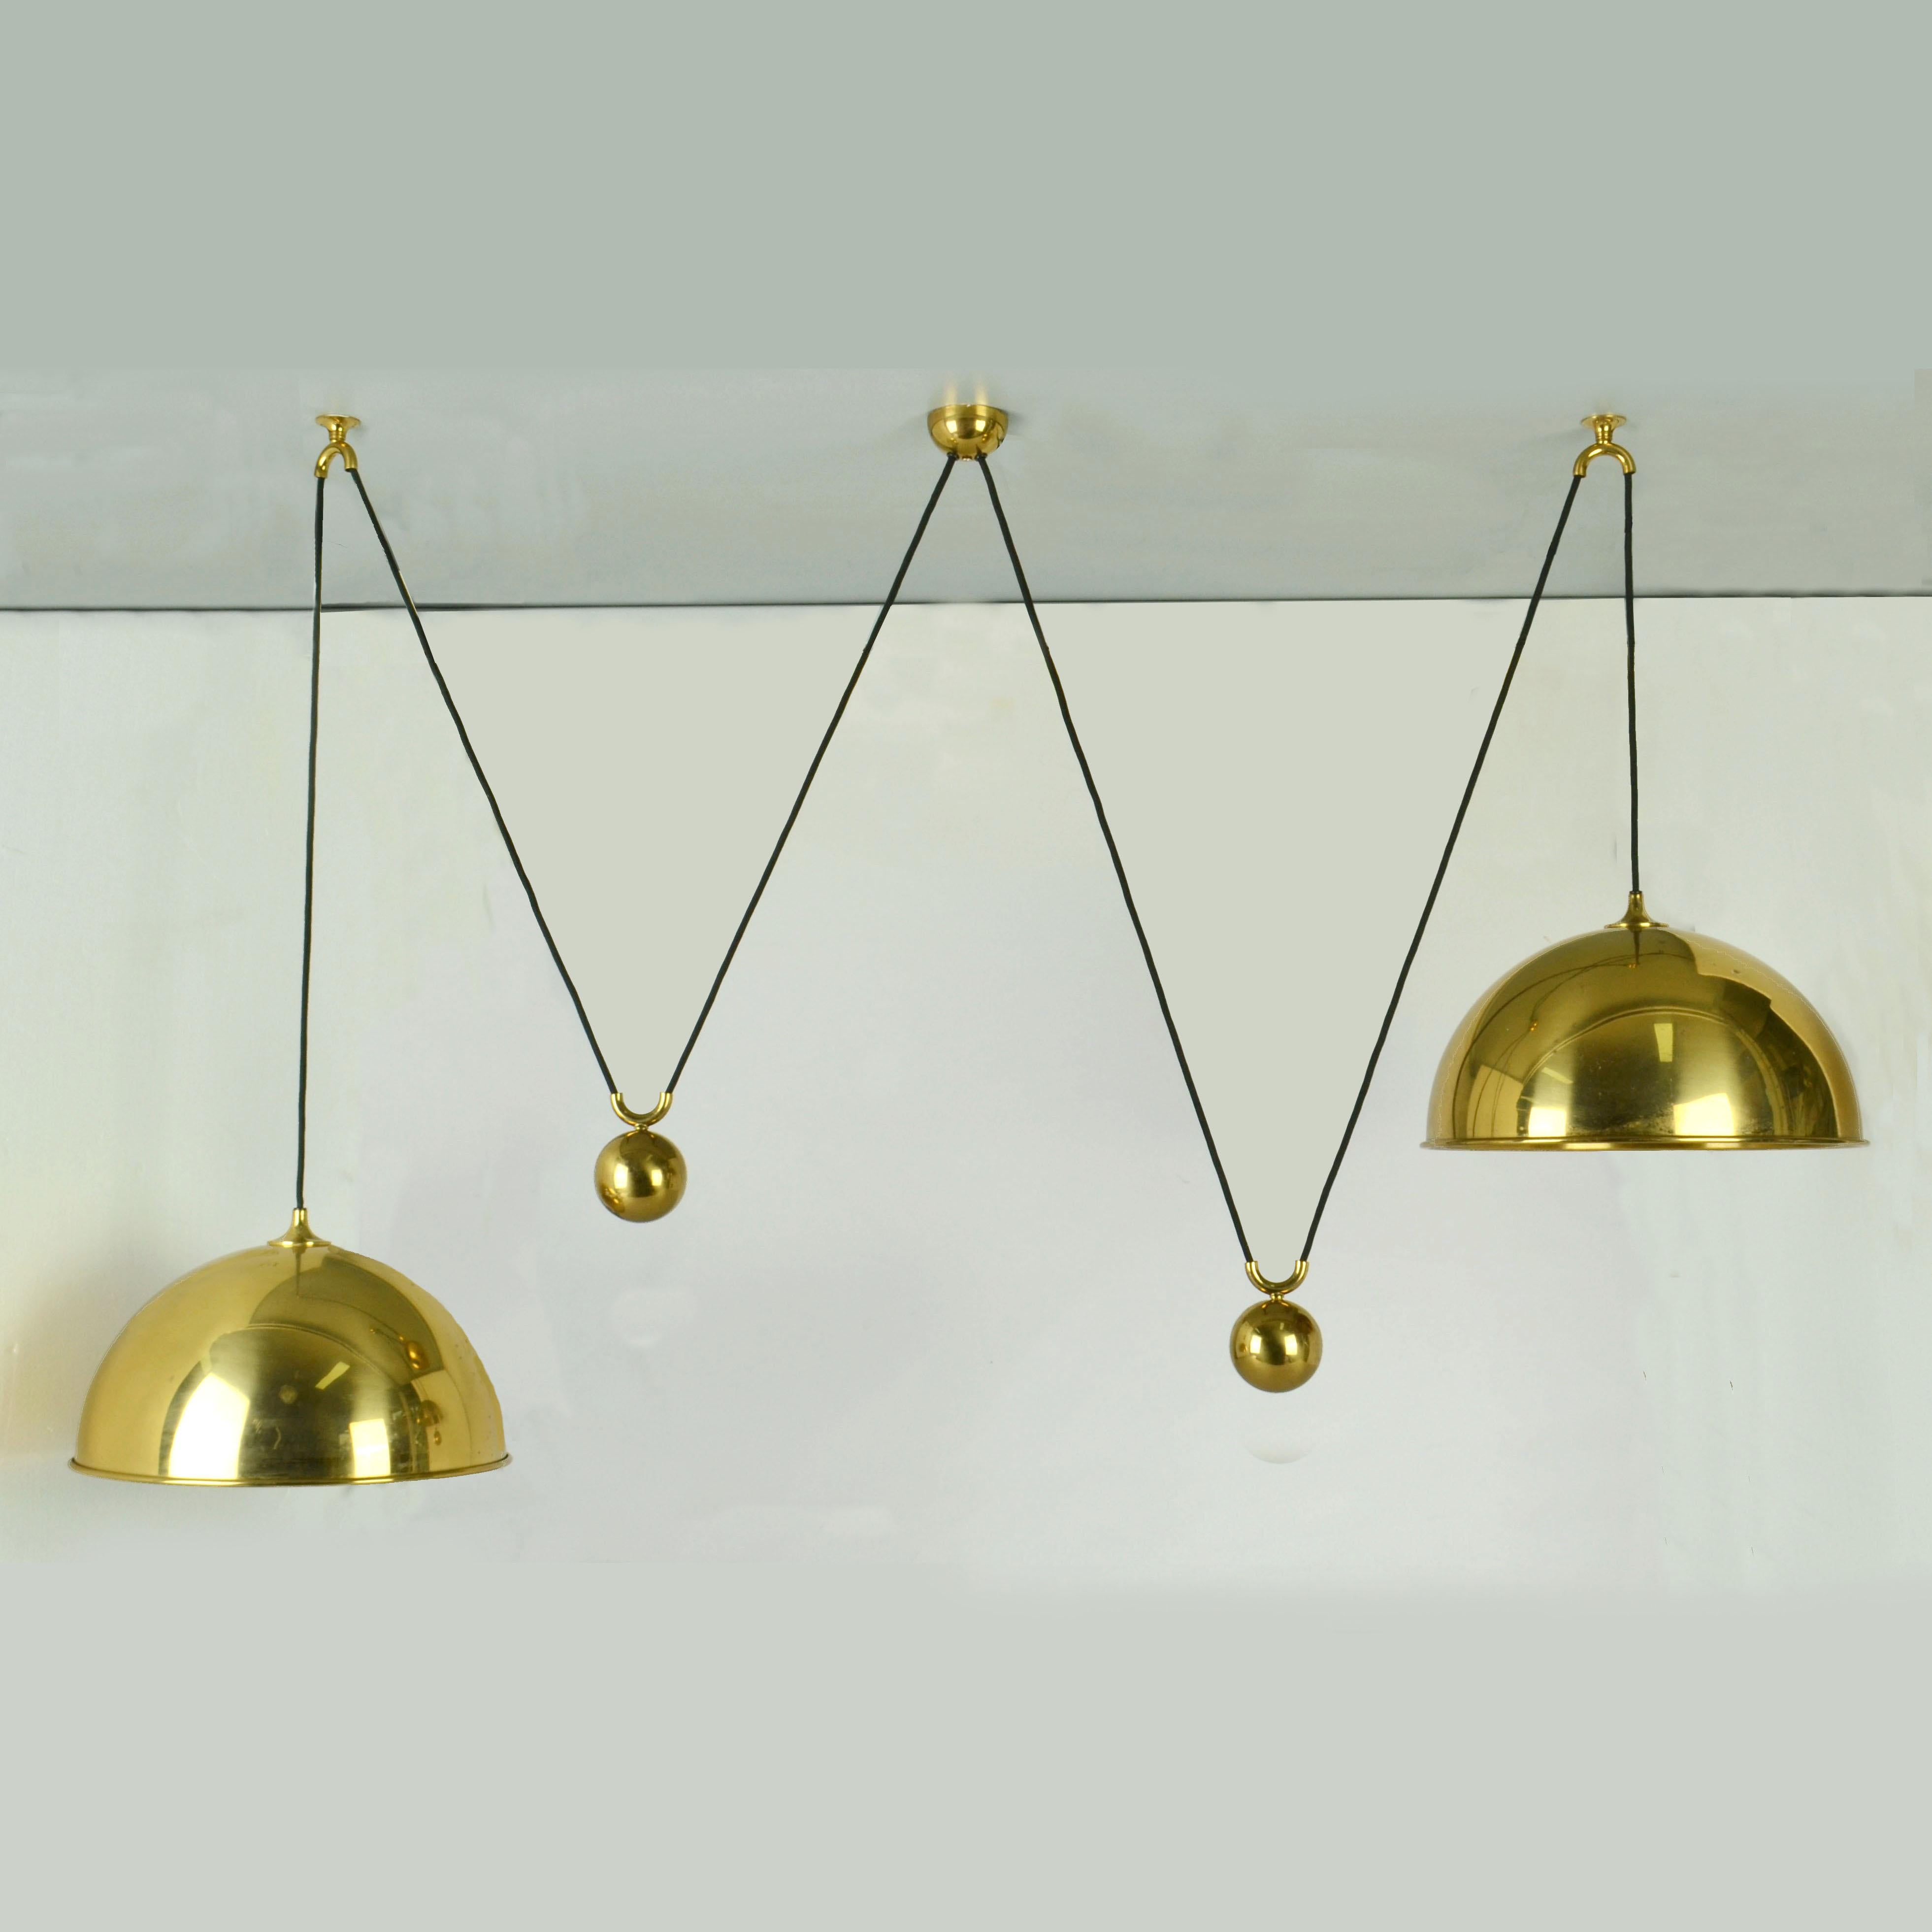 Pendant double 'Posa' by Florian Schulz, 1970's. Two brass pendants suspended, each with their own brass ball counter balance pulley system connected to side weight.s. Elegant and minimal pendants in a high quality brass moves smoothly up and down